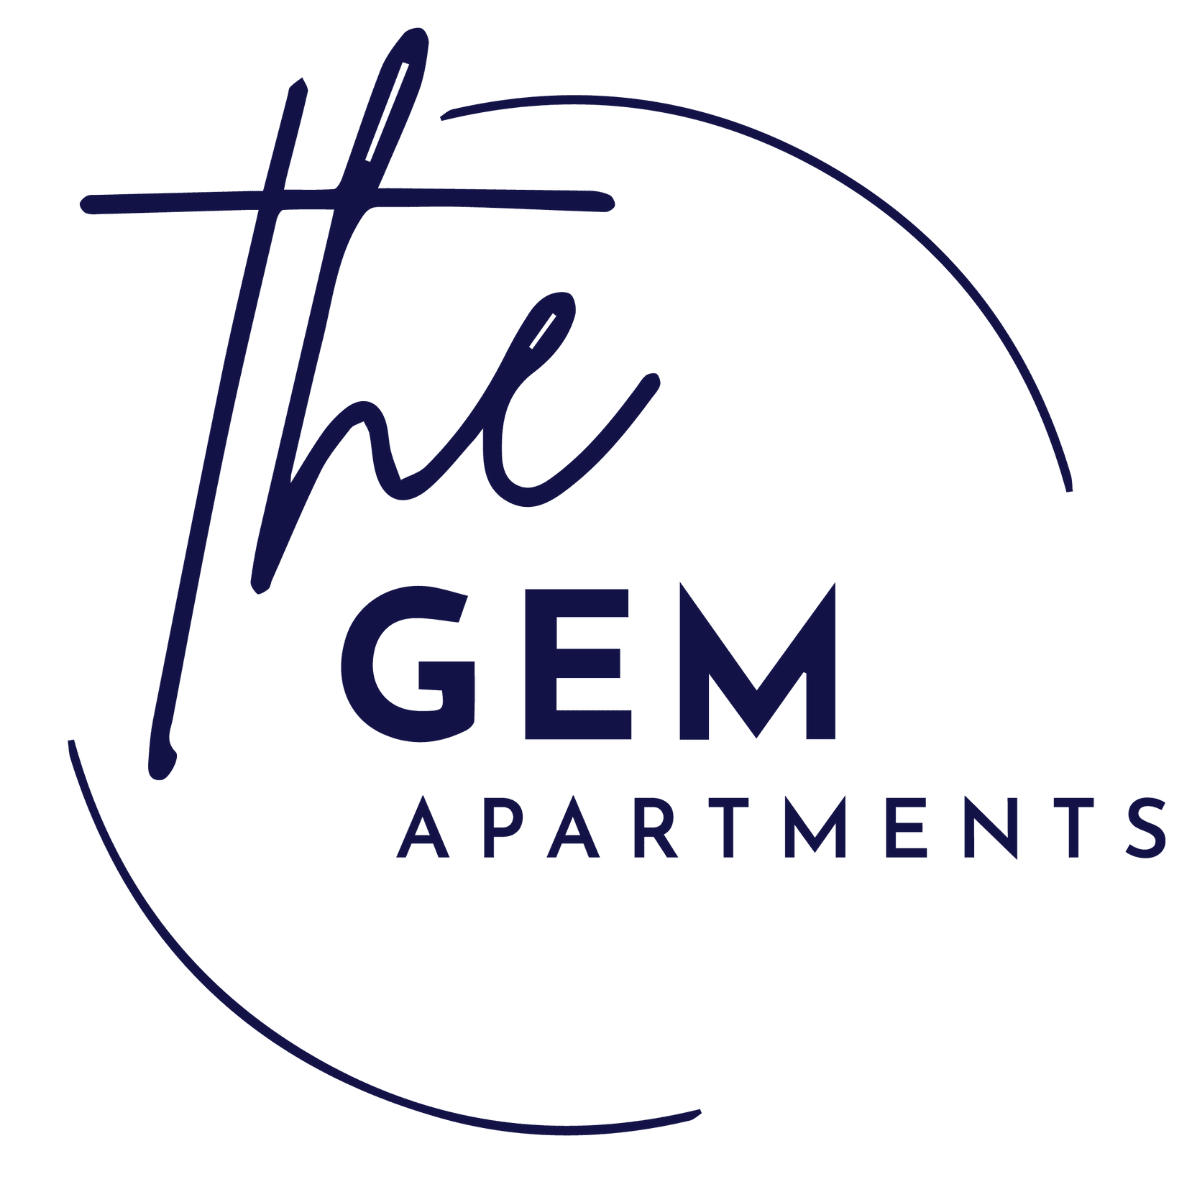 Apartment or Hotel Logo in Luxury Style - TemplateMonster